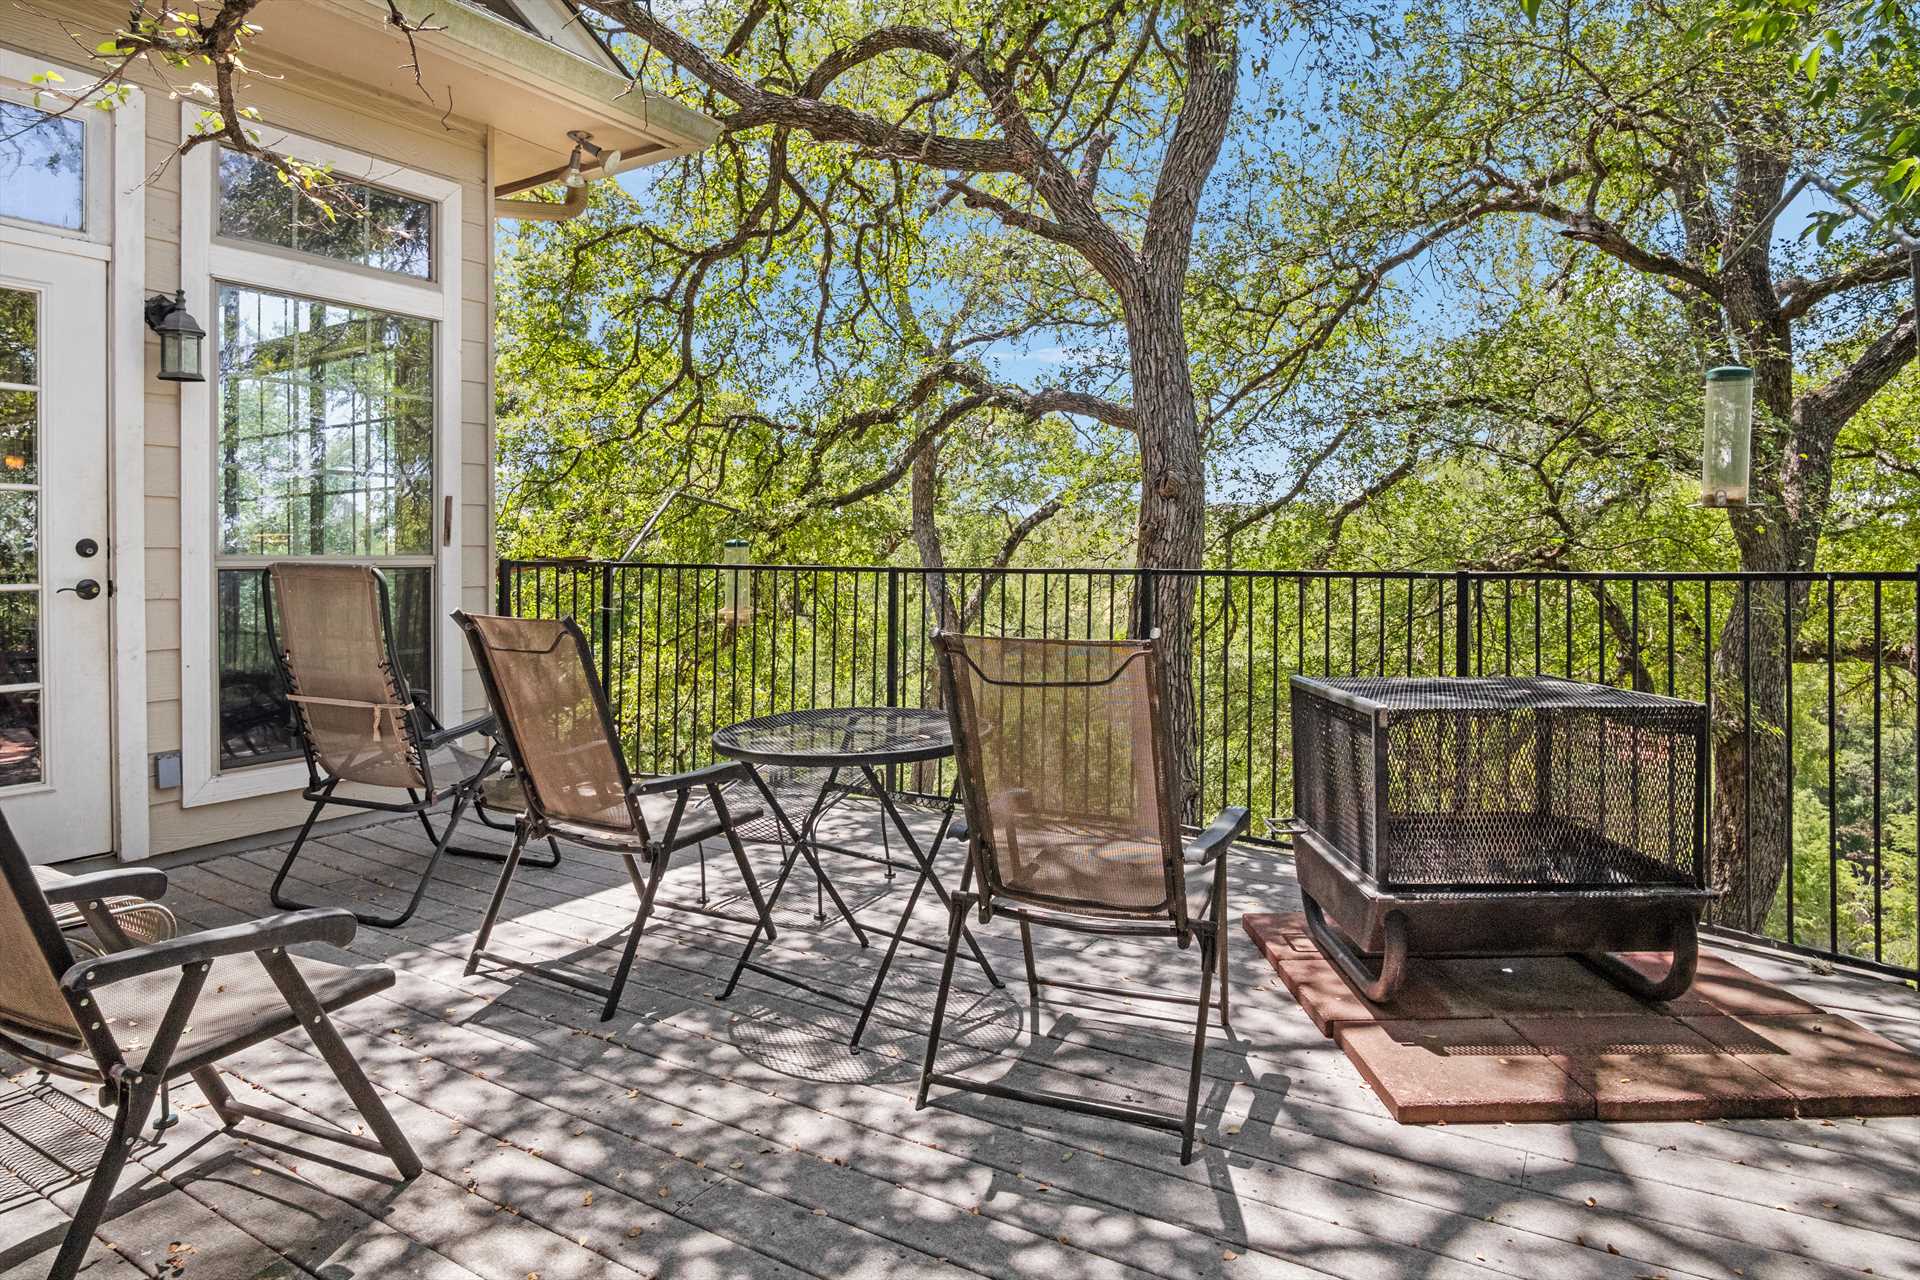                                                 Dappled shade and sunlight on the deck keep things cooler, with plenty of outdoor furniture for everyone.